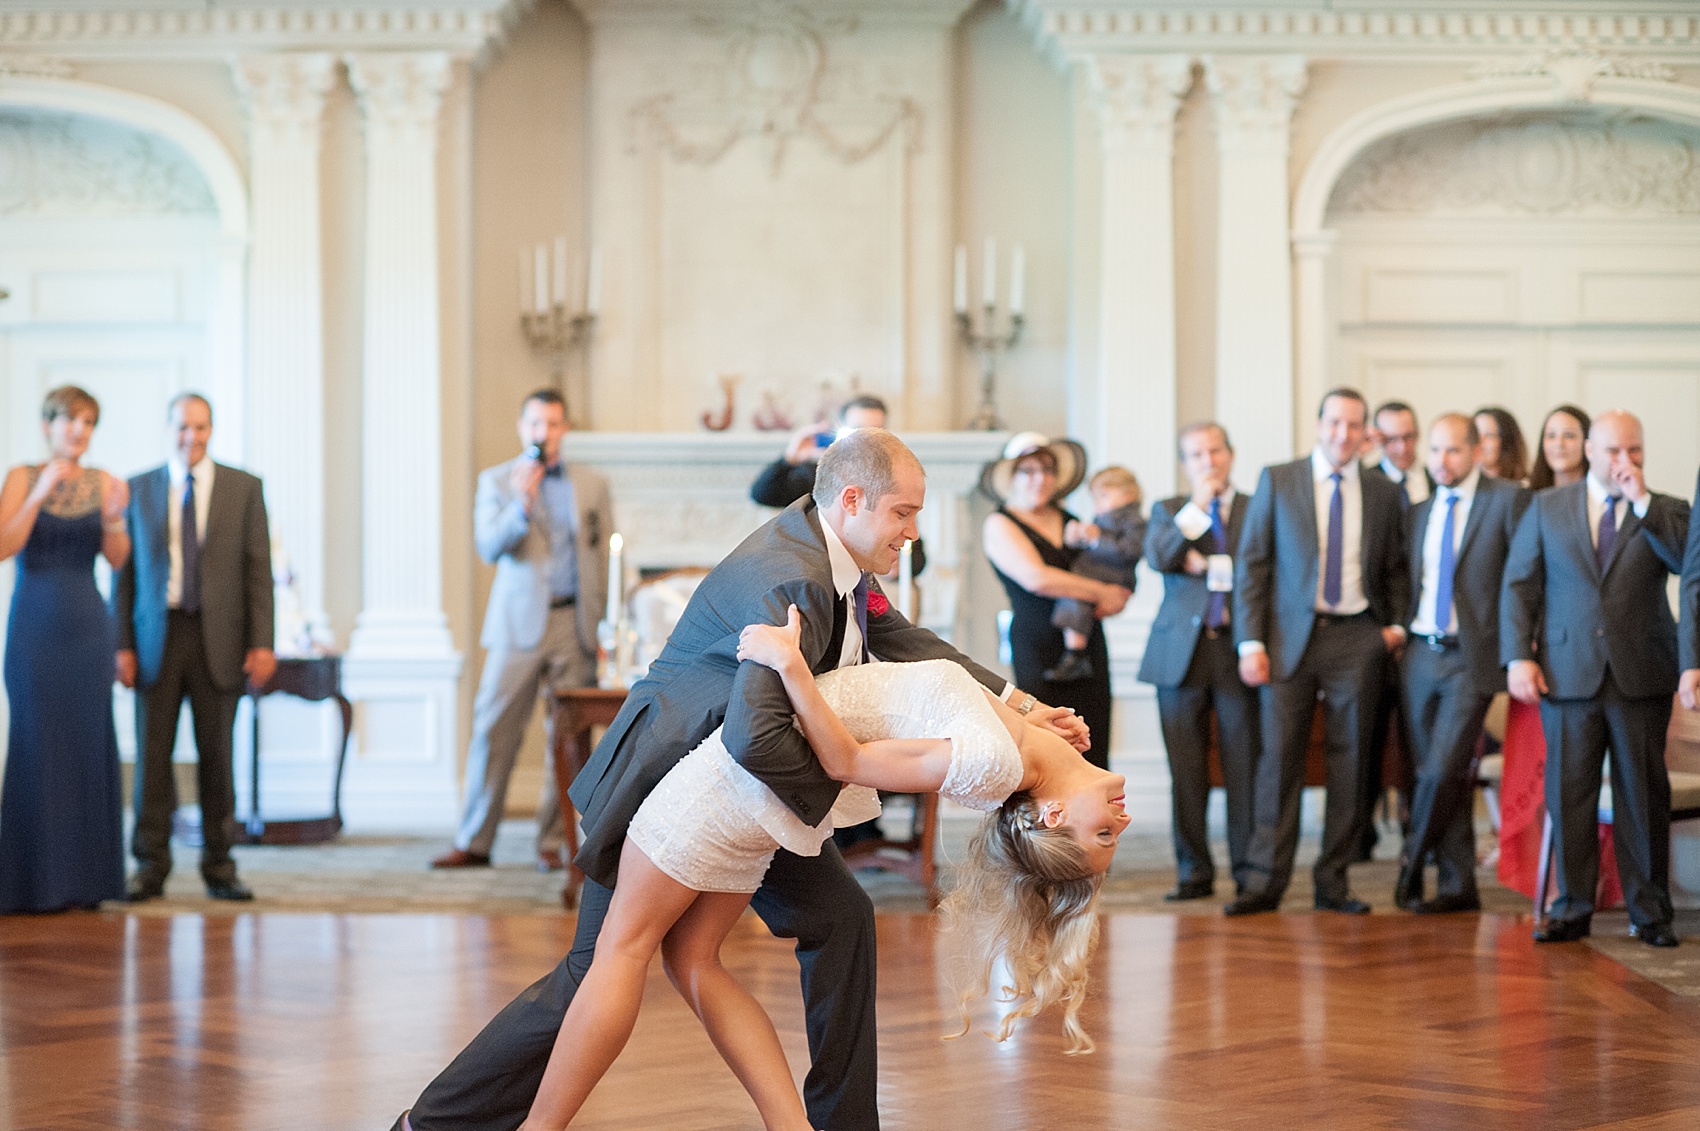 The bride and groom do a choreographed first dance complete with a grand finale dip! Photo by Mikkel Paige Photography.